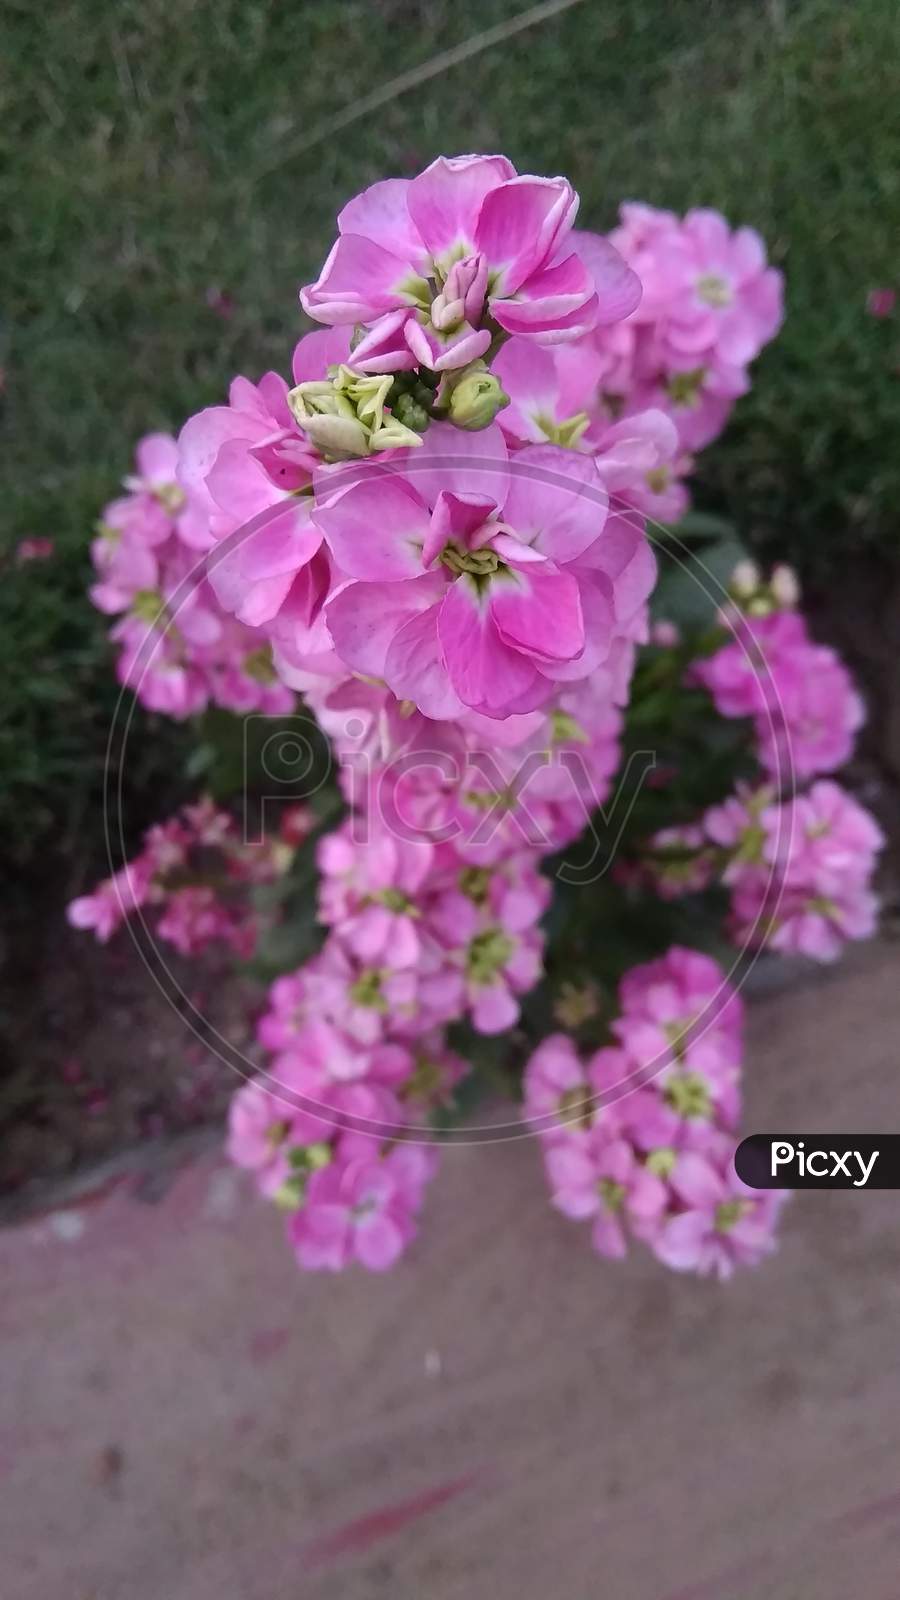 Pink blossom garden phlox flower plant in front of camera focus